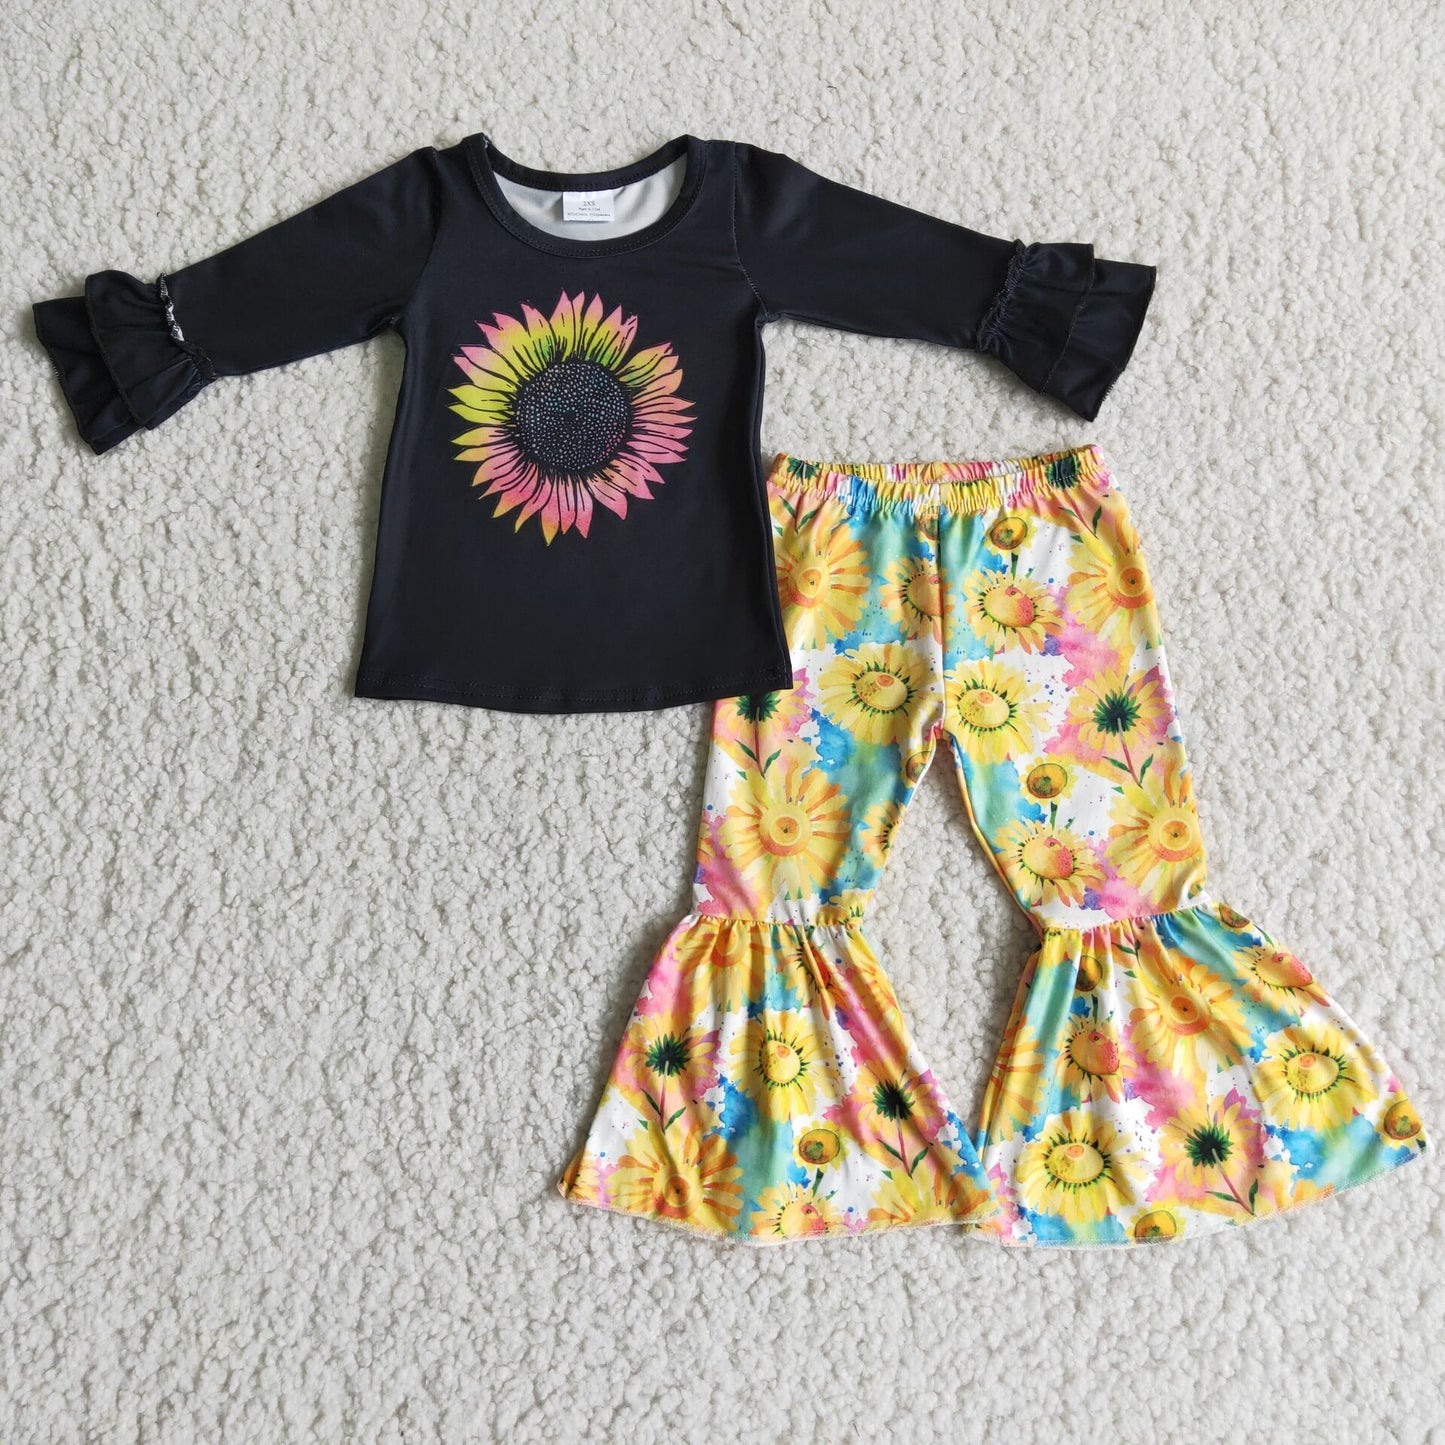 Sunflower print kids girls boutique outfits